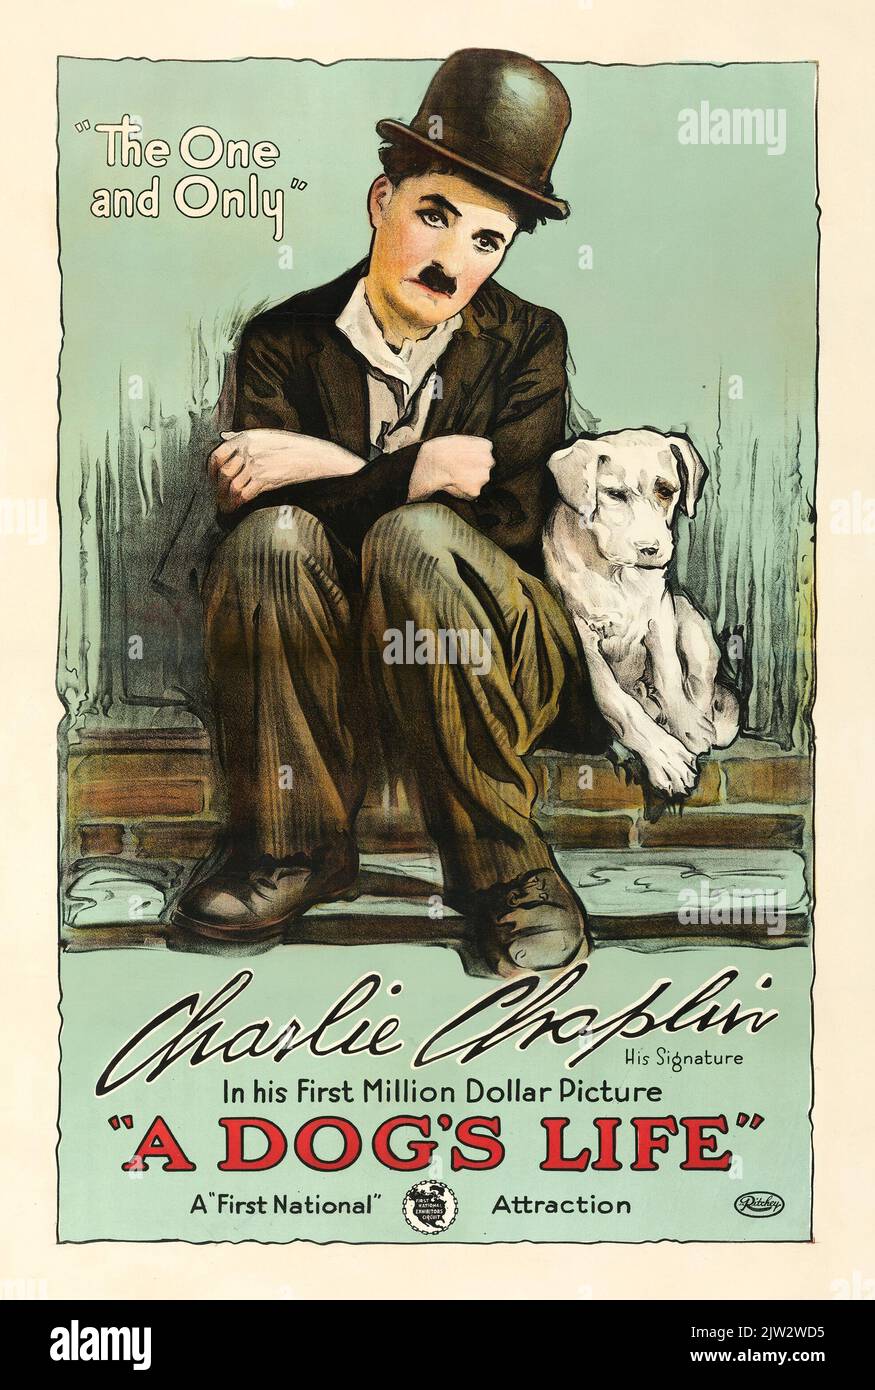 A Dog's Life (First National, 1918) Charlie Chaplin film poster Stock Photo